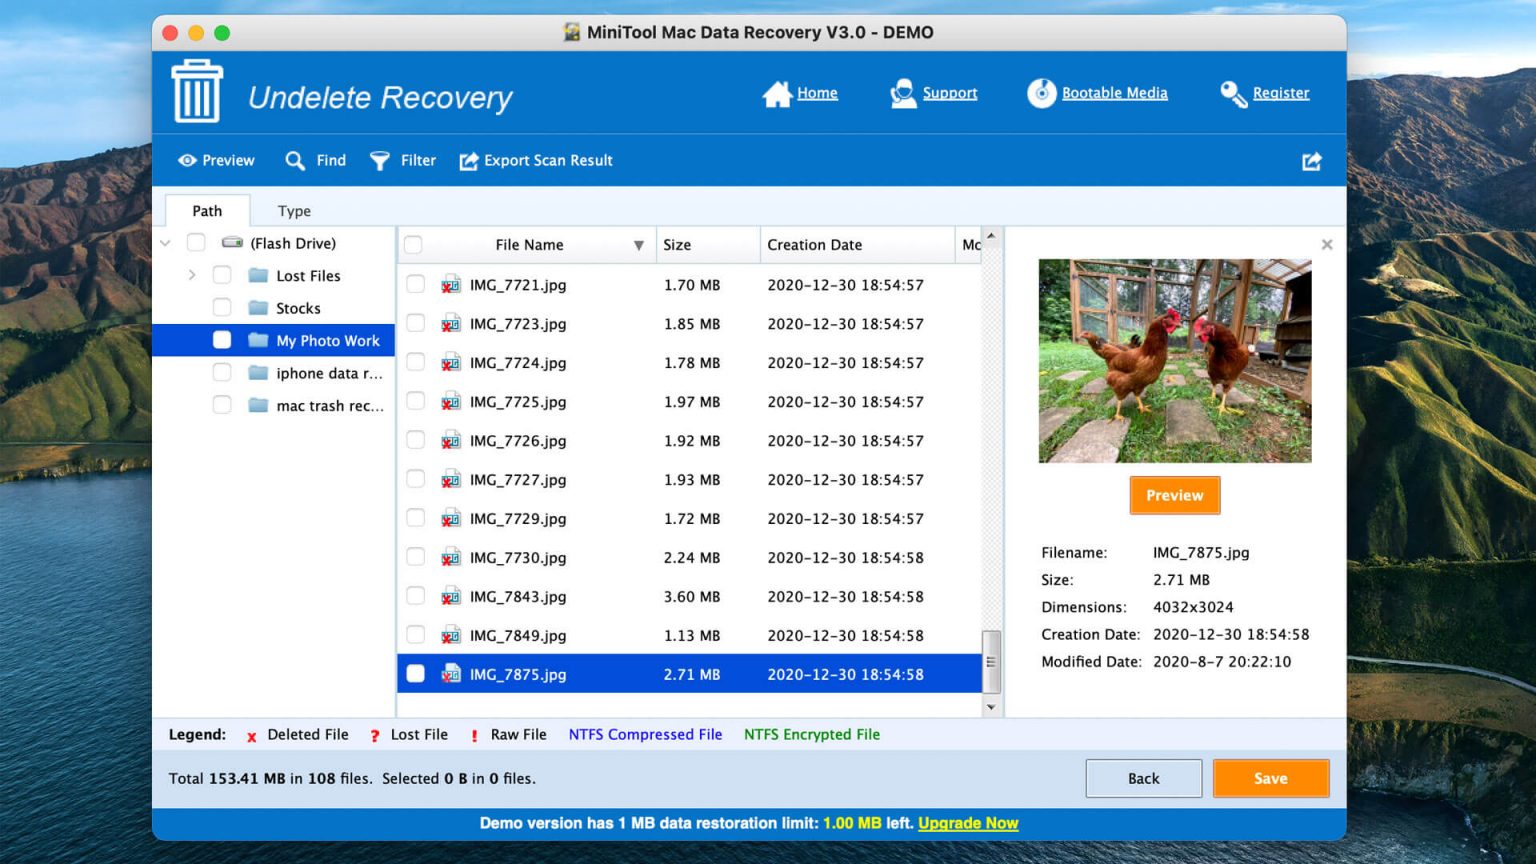 best data recovery software mac